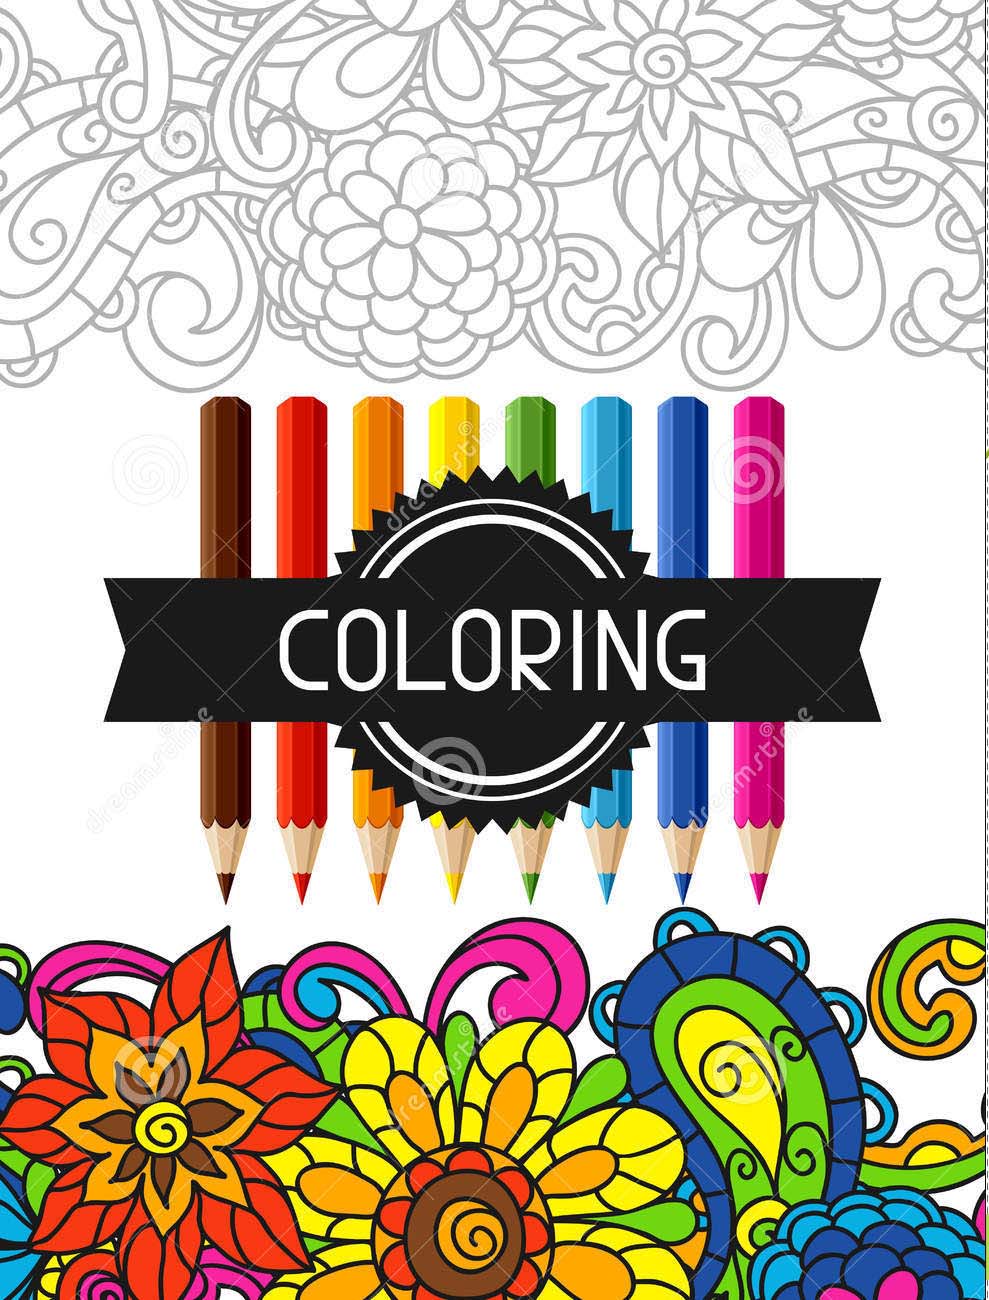 How to make Homemade coloring books